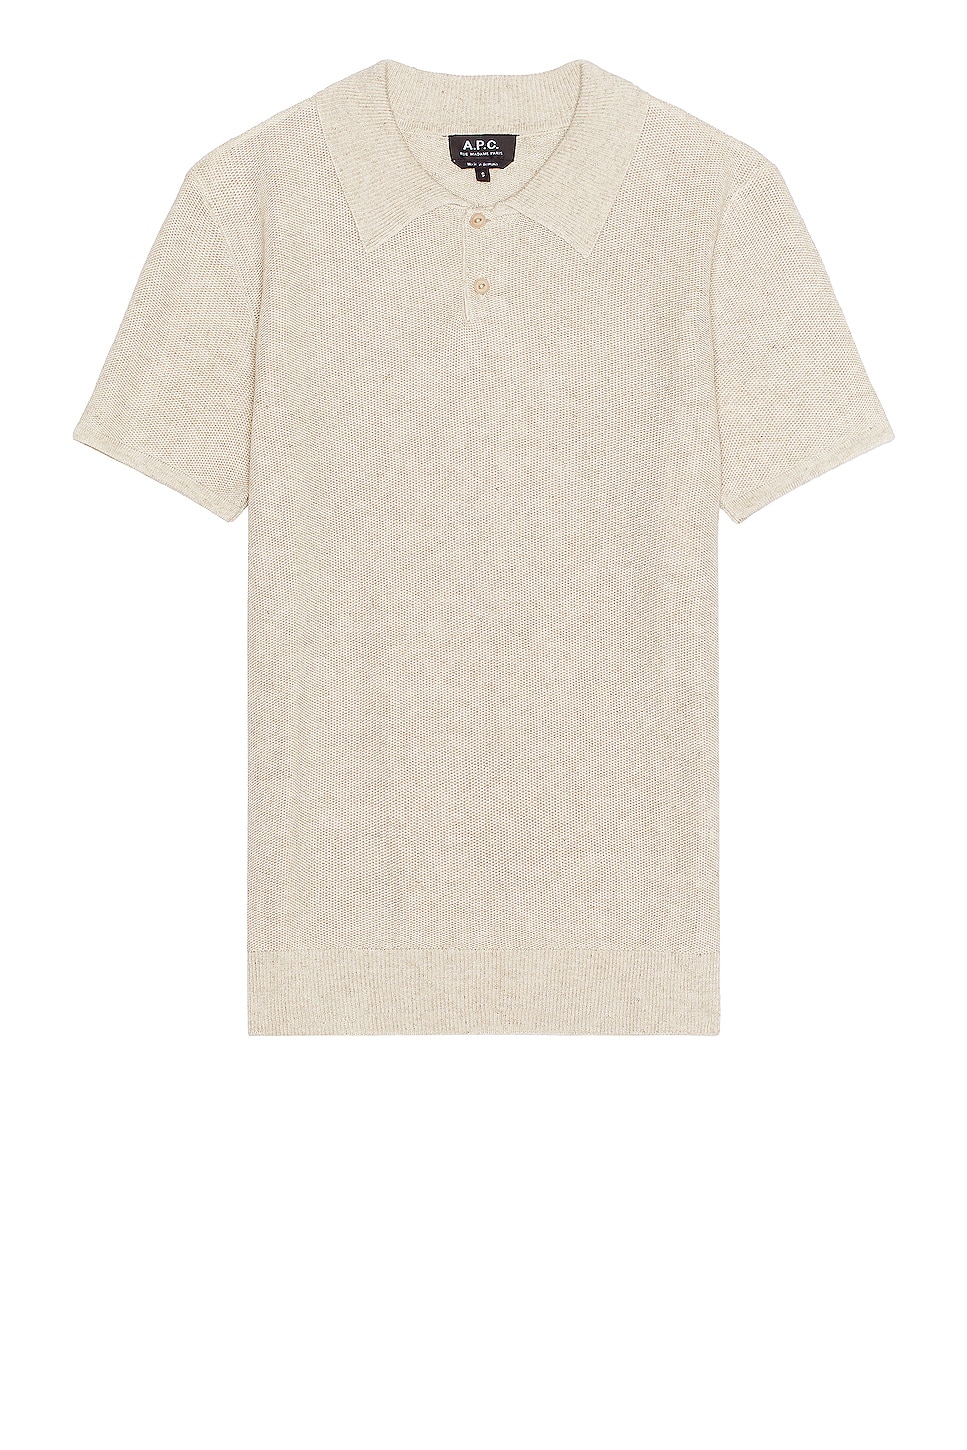 Image 1 of A.P.C. Polo Jay in Beige